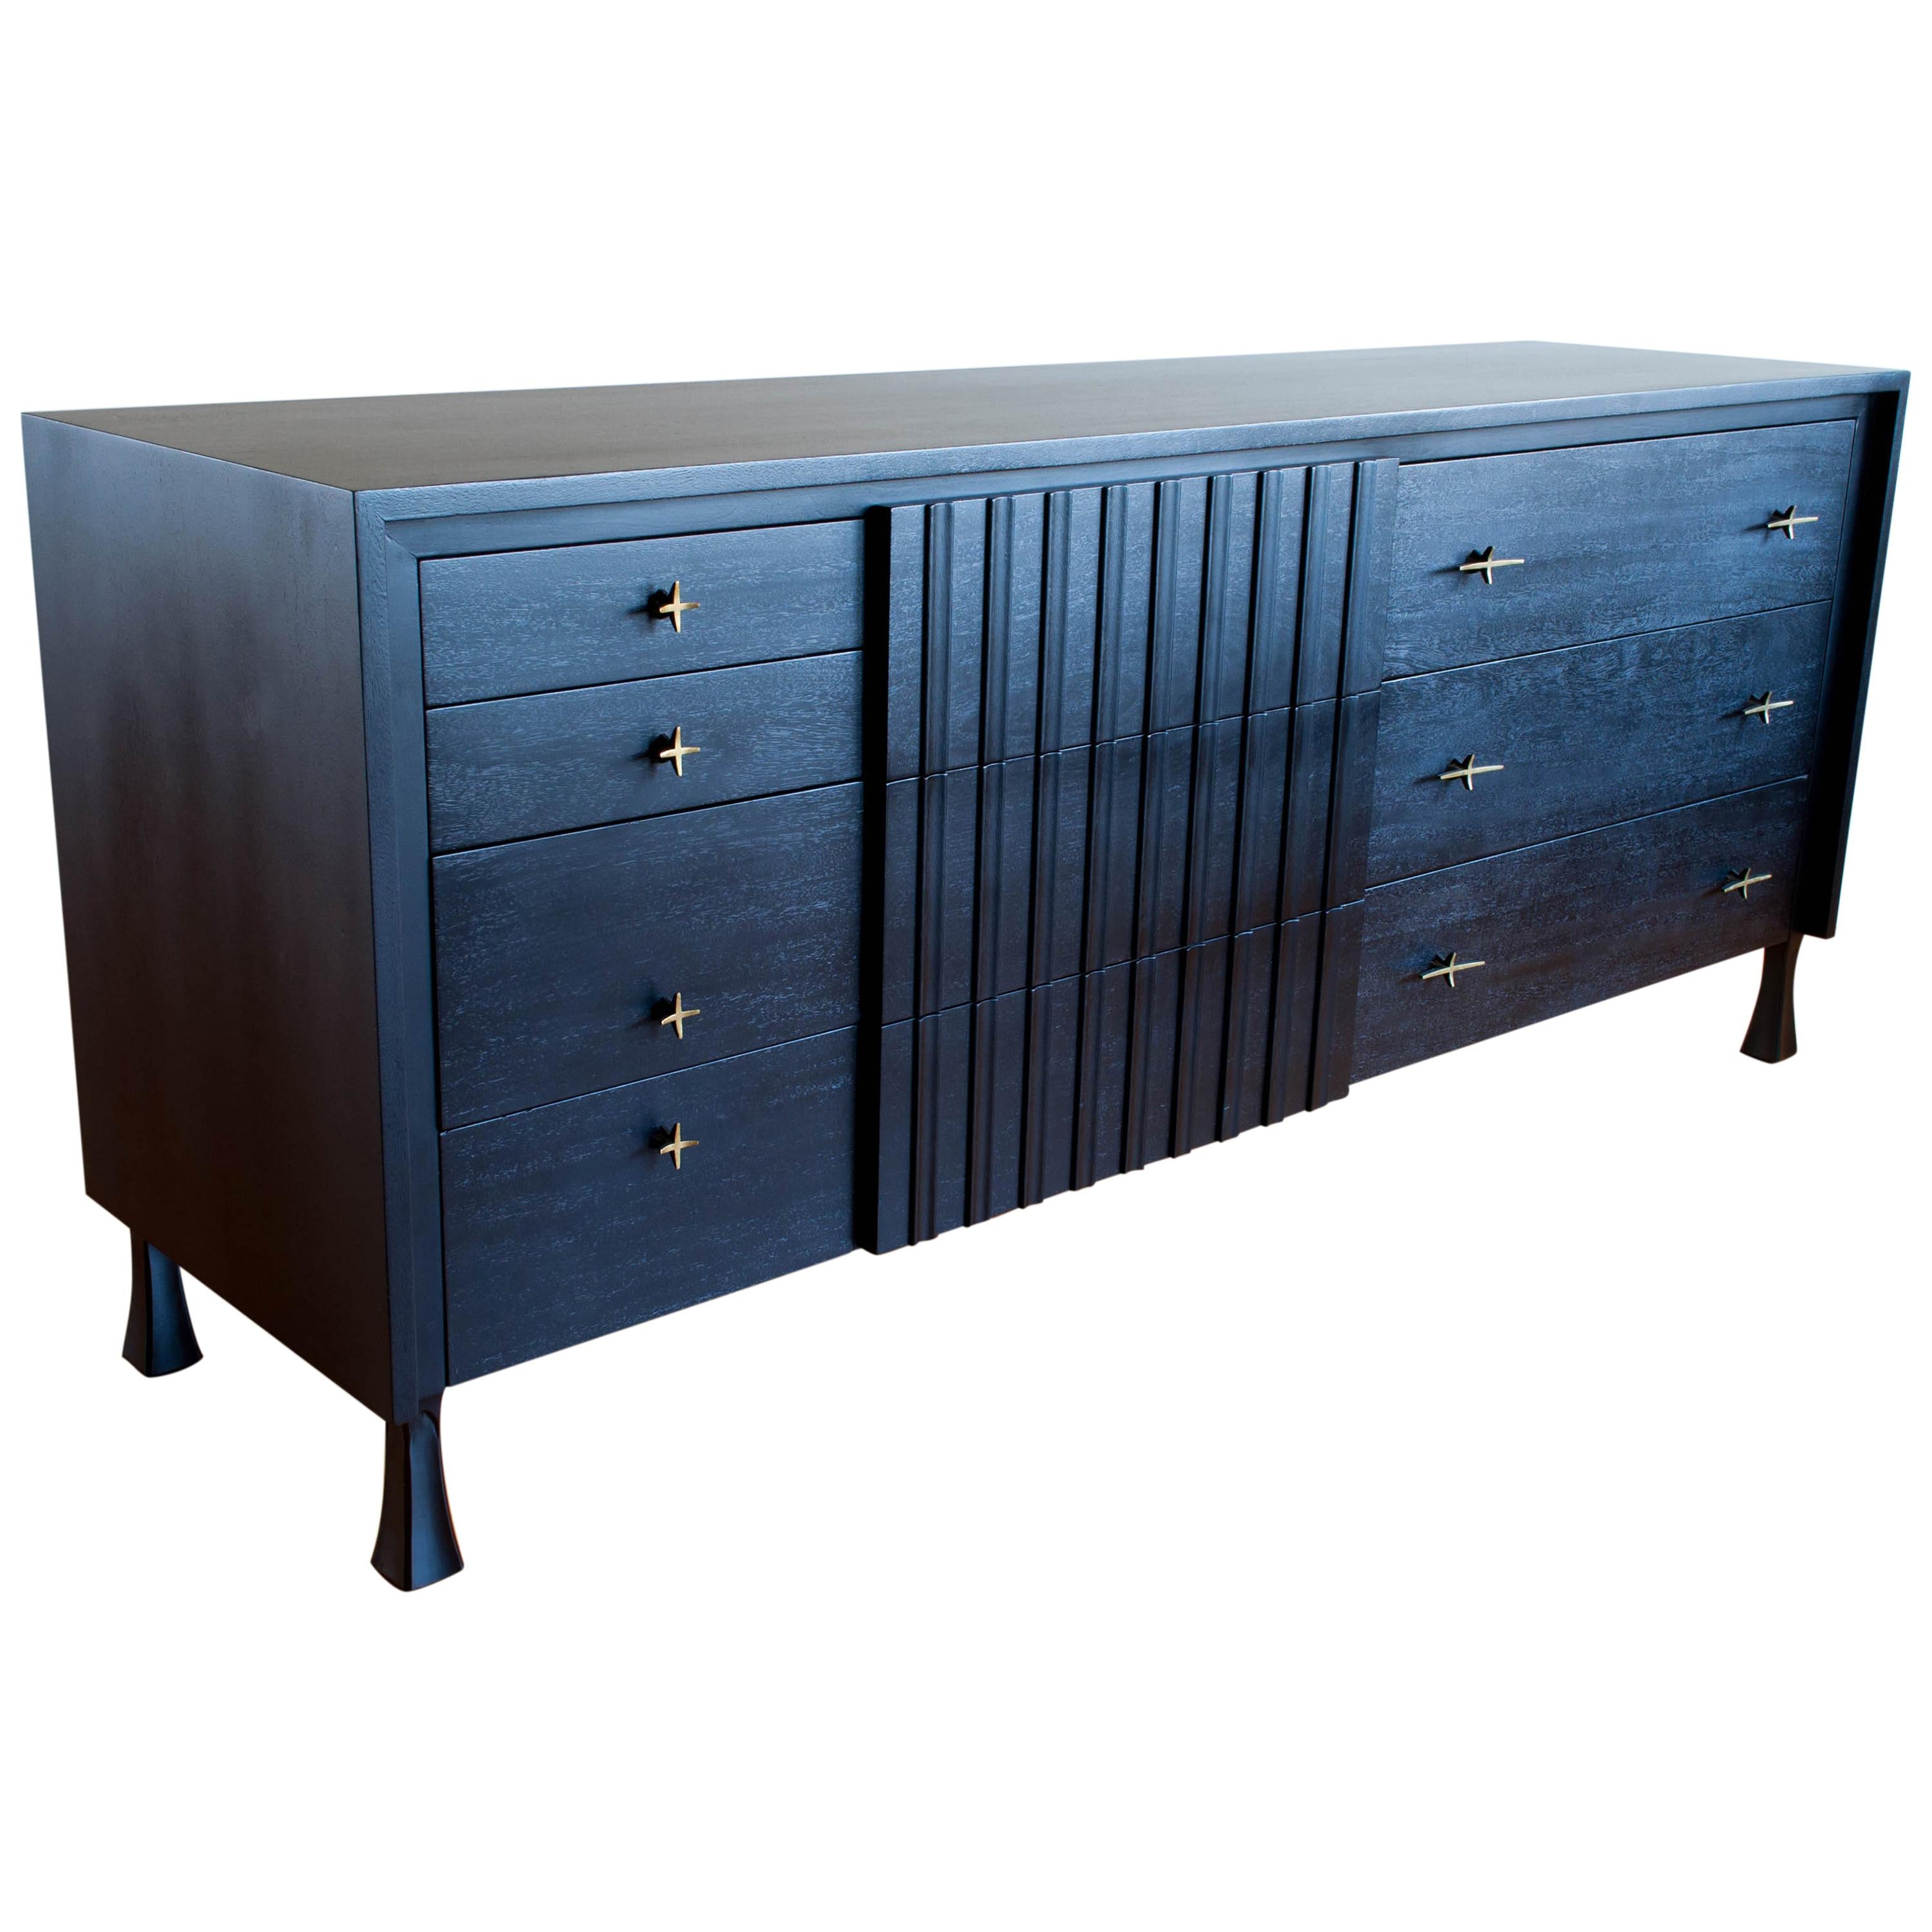 Gorgeous credenza by John Widdicomb that has been professionally restored with an ebonized finish allowing the beautiful grain to still show through. This fantastic dresser is exceptionally well made and features 10 dovetailed drawers of ample